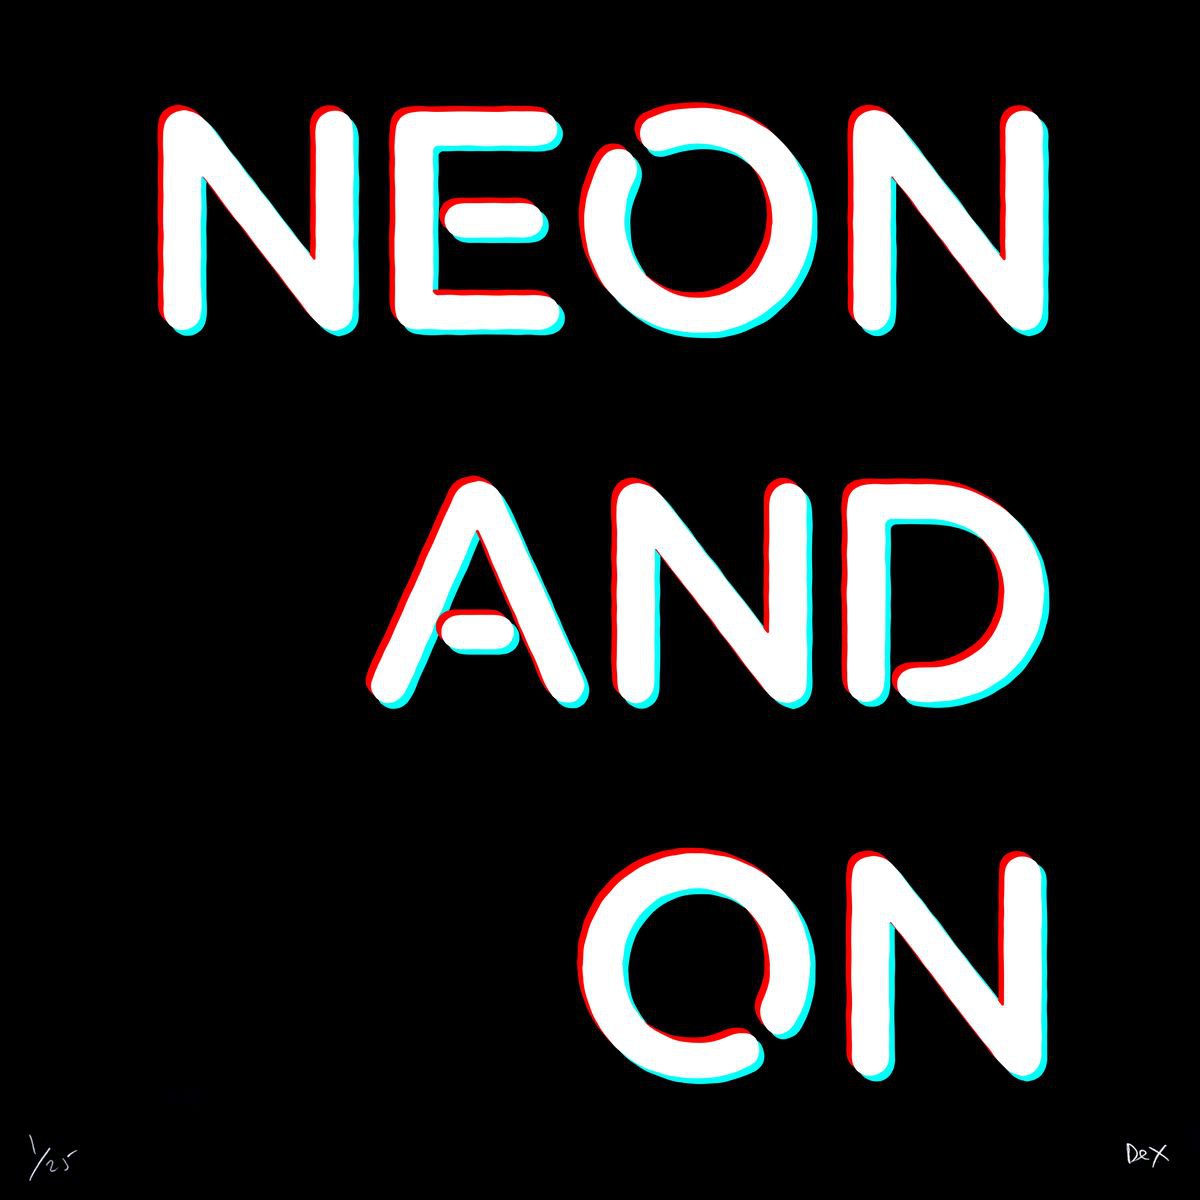 Neon And On (3D, 2017) by Dex